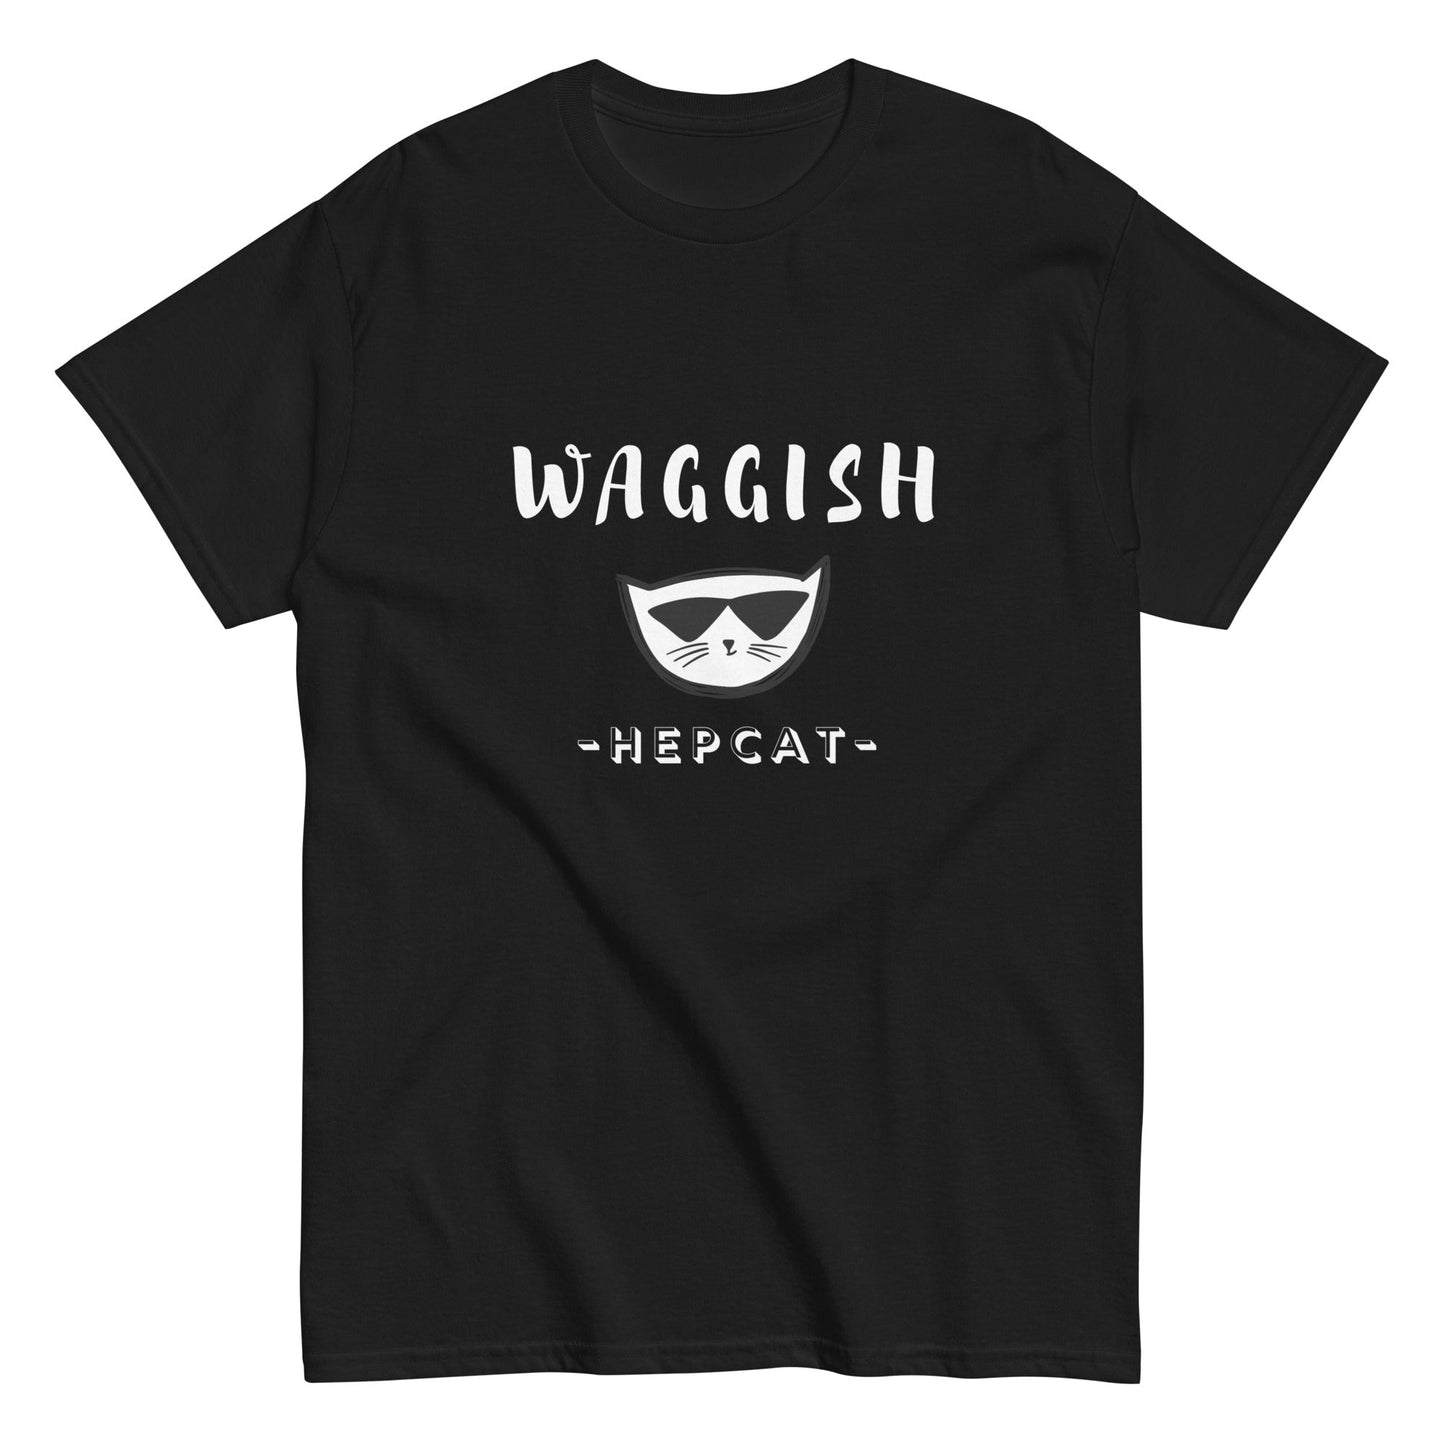 The Waggish Hepcat, Lets Talk about it! - Pickett's Lane